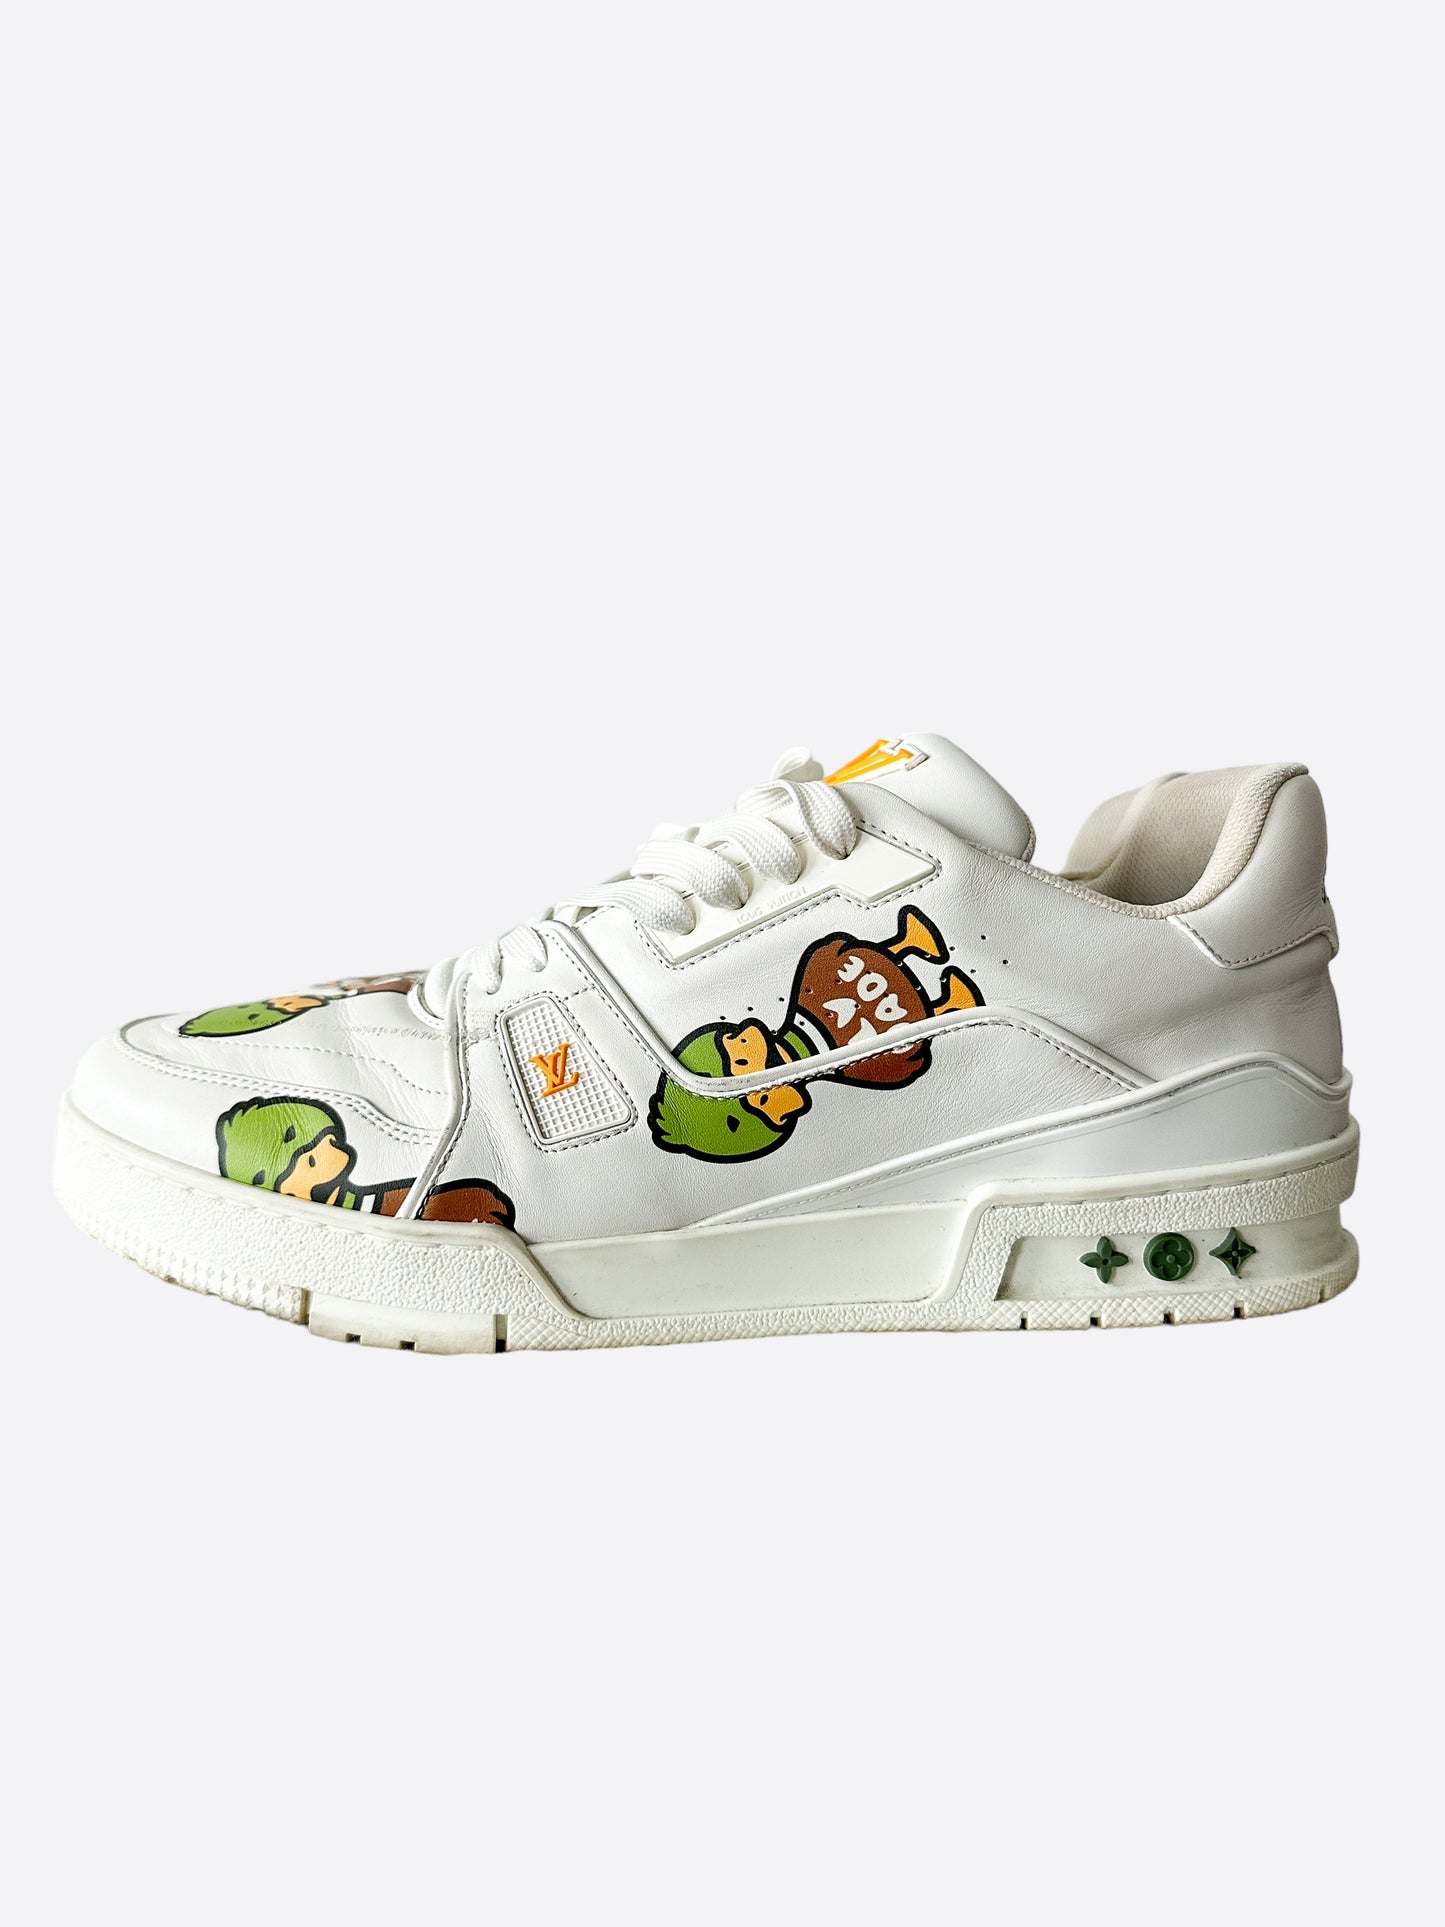 NIGO X MADE Trainer Duck Graffiti Sneaker Low Heart Casual Shoes White  Women Trainers Sneakers From Minlaicai, $113.98